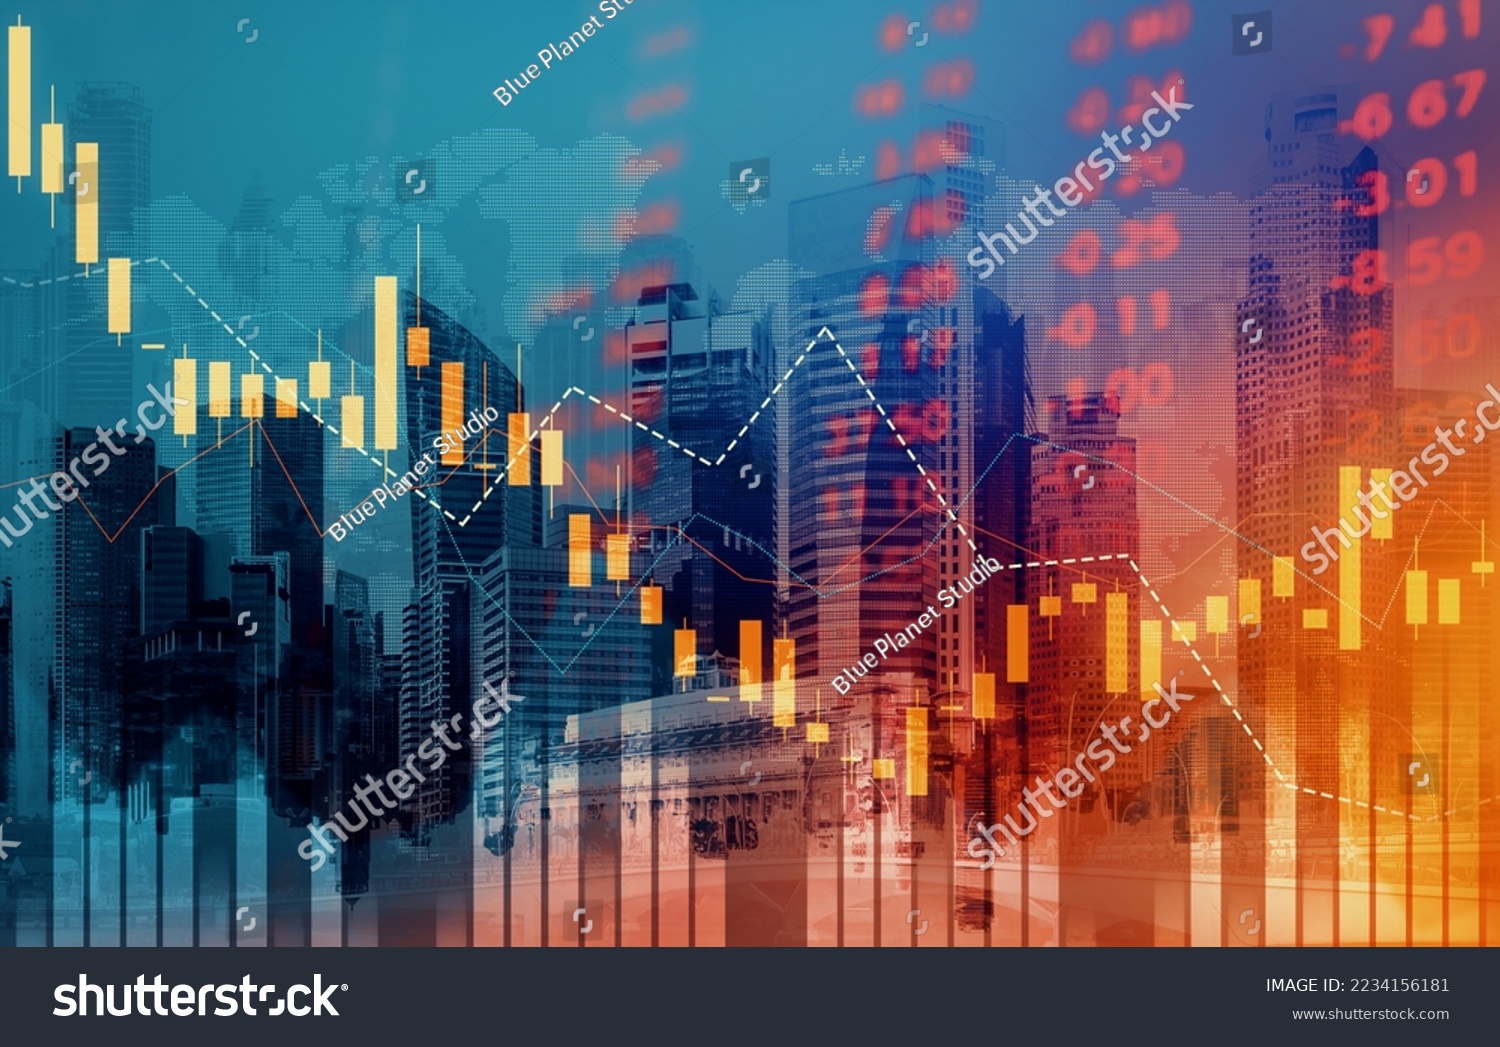 Economic crisis concept shown by declining graphs and digital indicators overlap modernistic city background. Double exposure. #2234156181